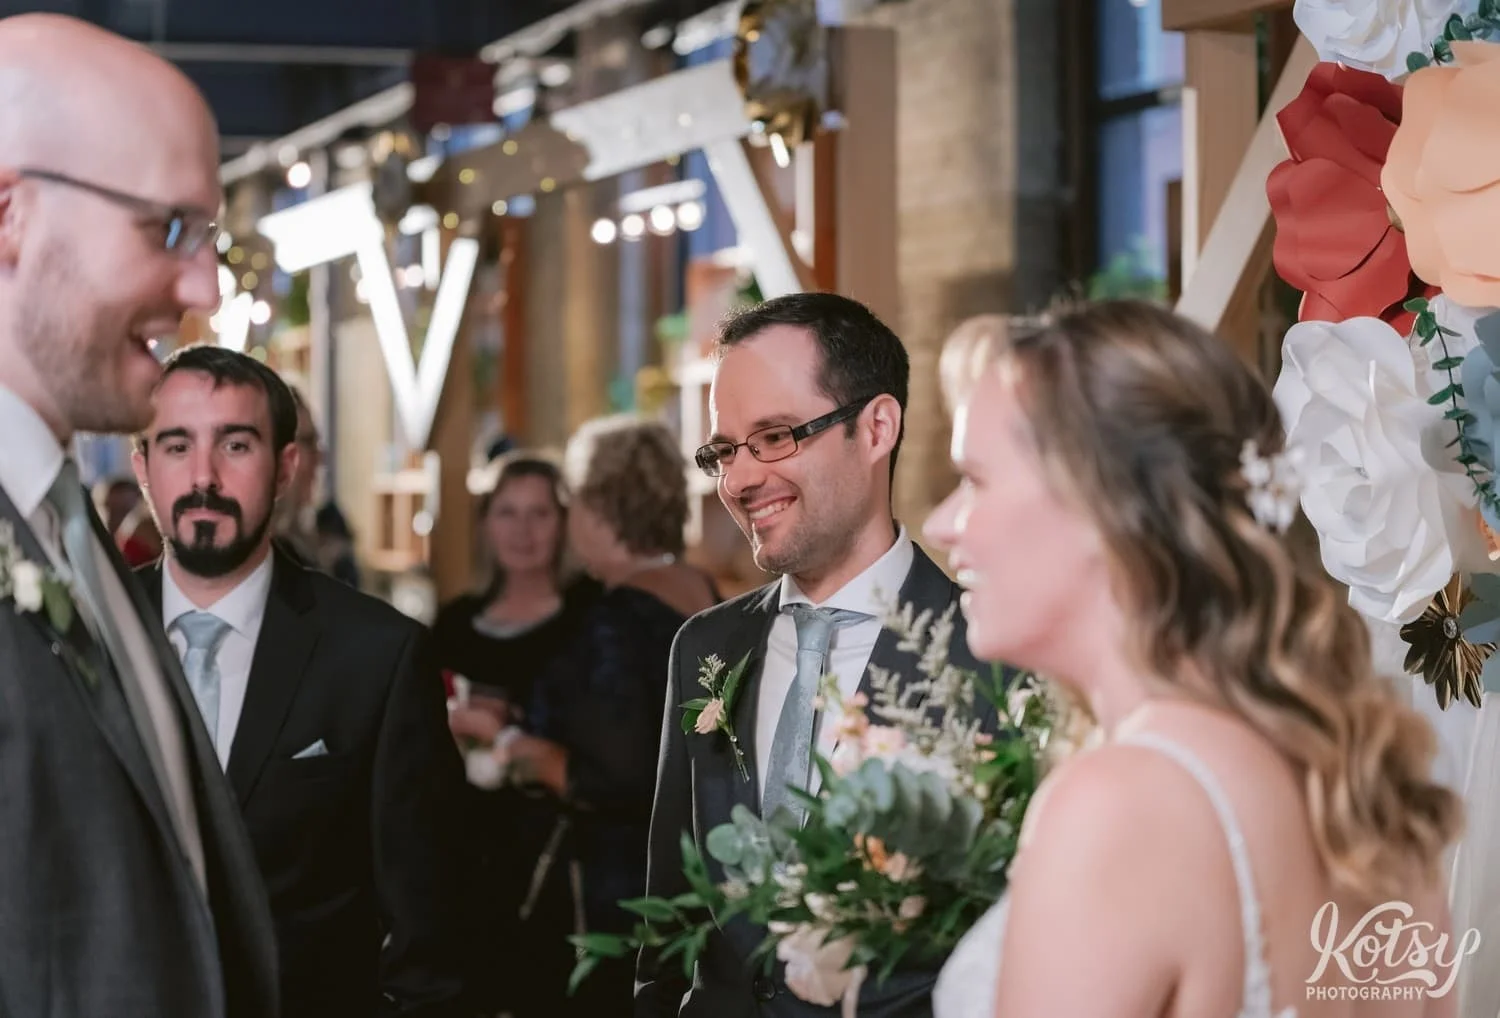 A man in a gray suit and green tie smiles to someone off camera during a Second Floor Events wedding reception in Toronto, Canada